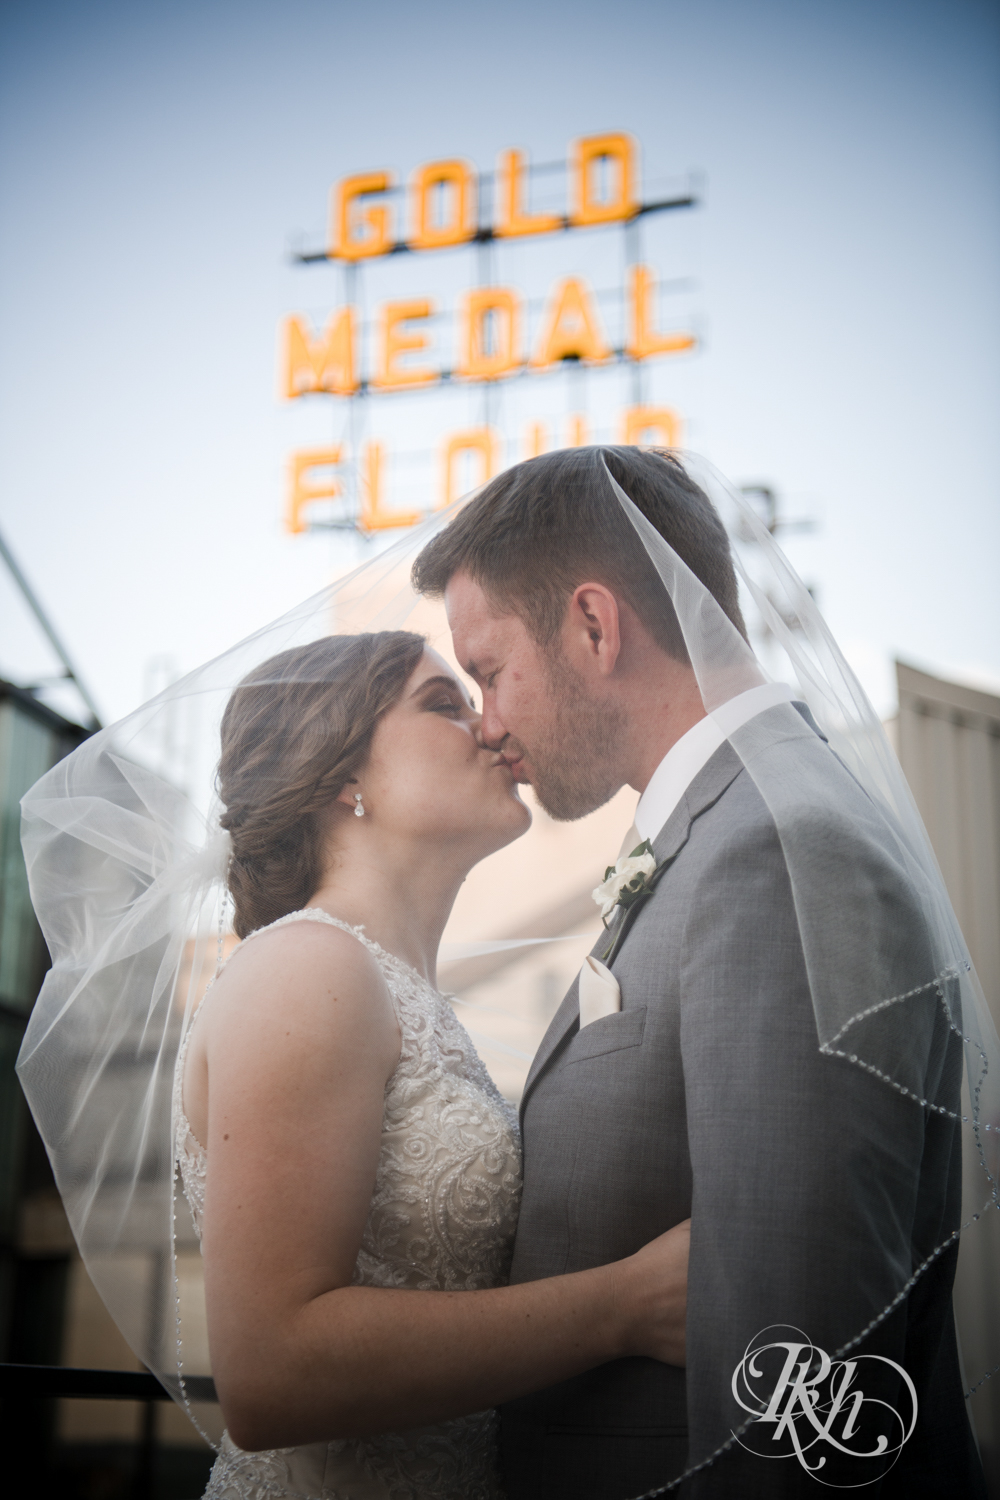 gold medal flour sign bride and groom